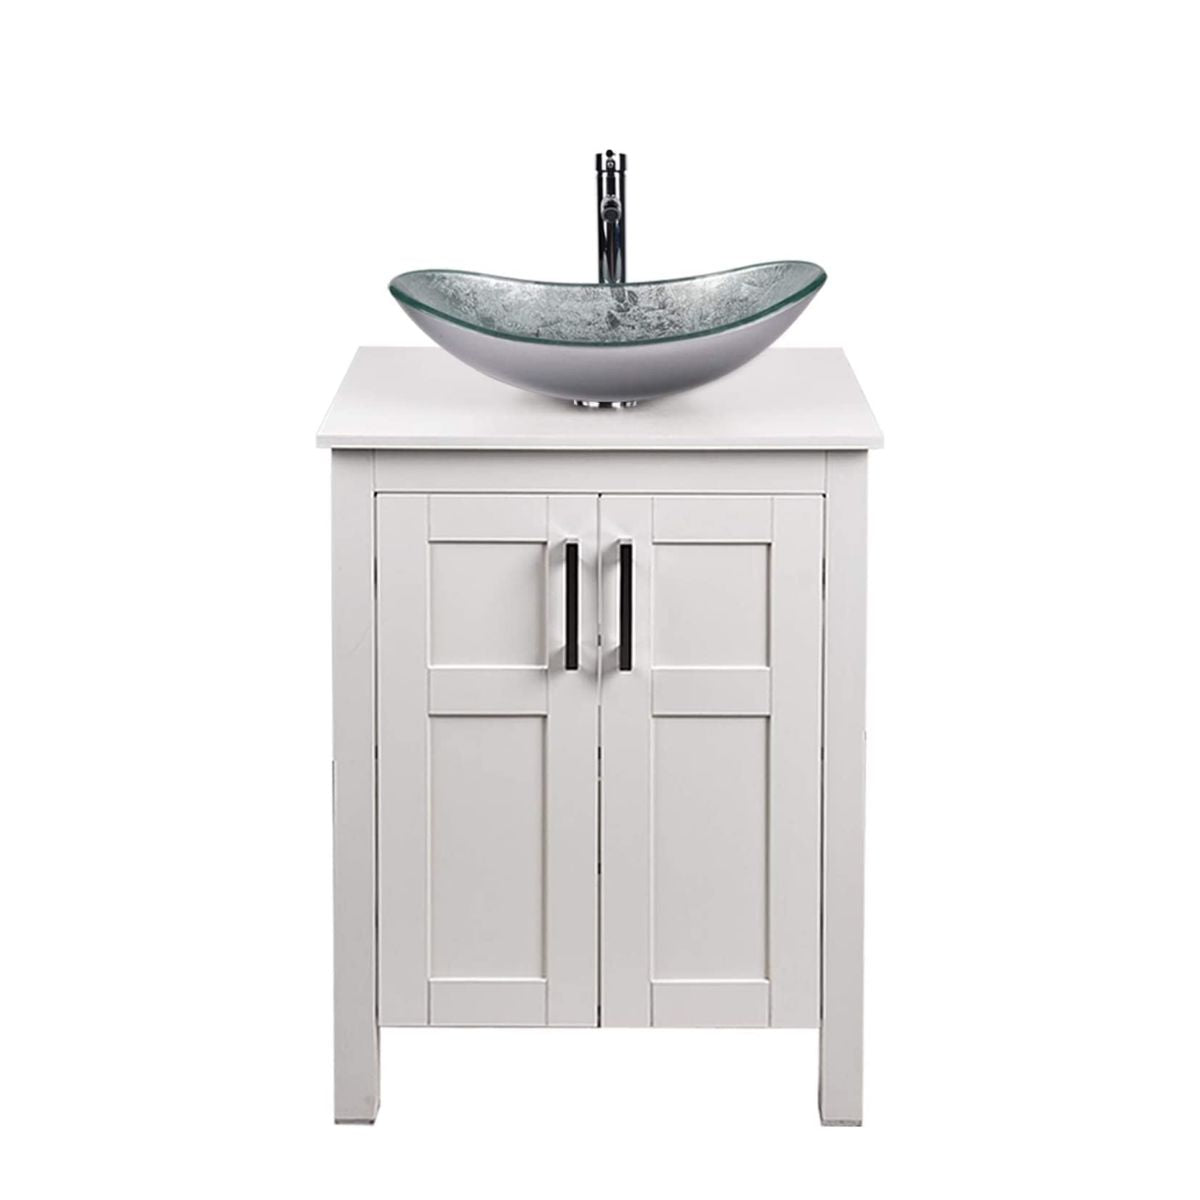 Elecwish White Bathroom Vanity and Silver Boat Sink Set HW1120-WH